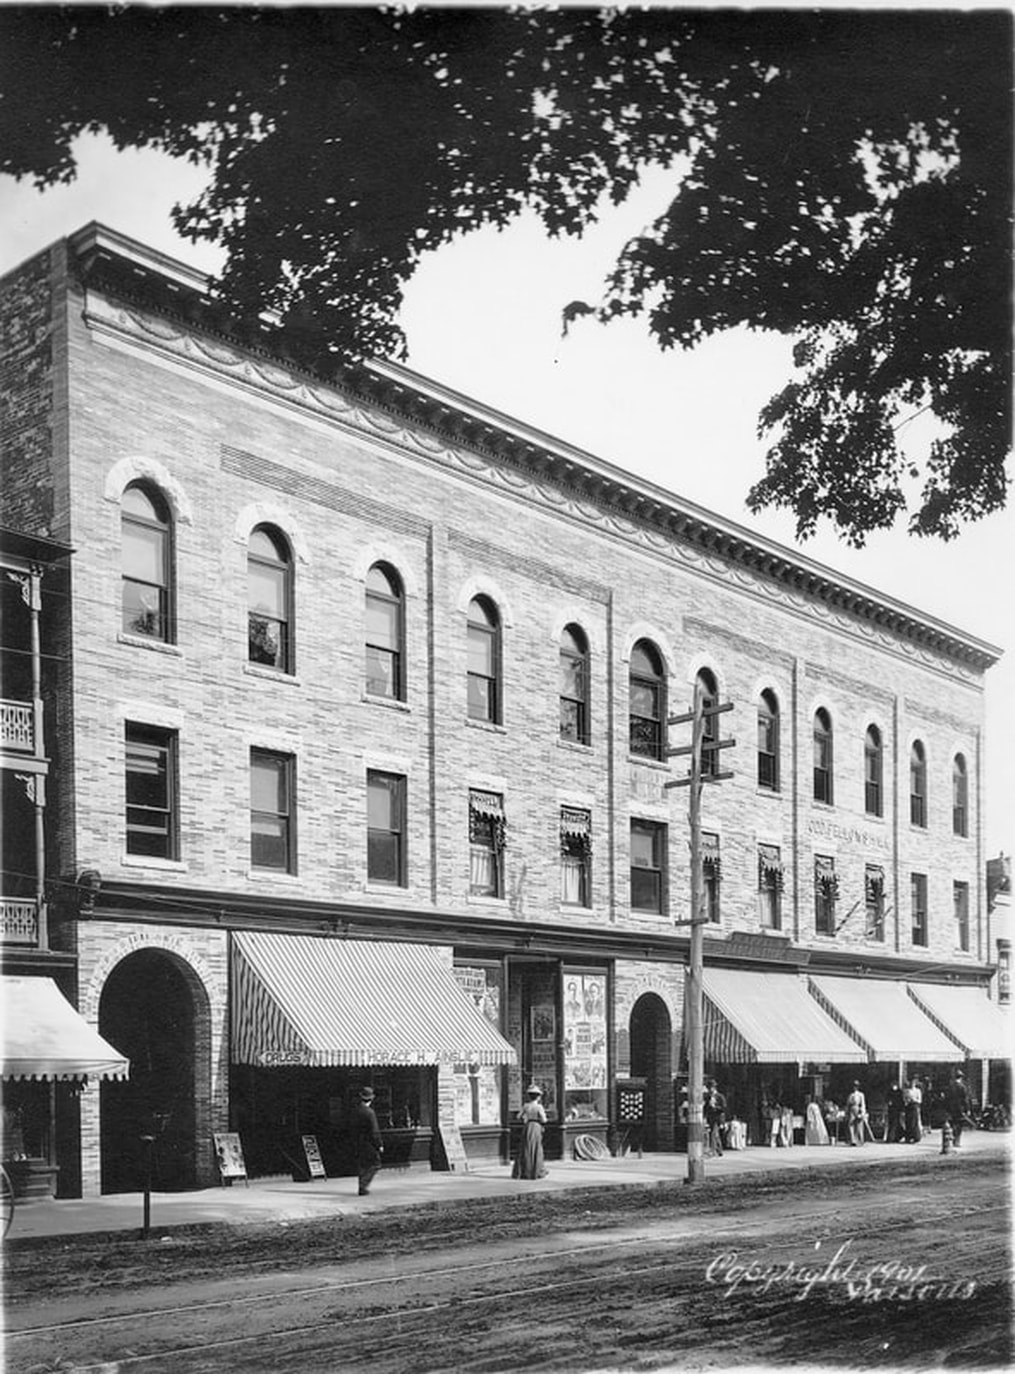 1901 - Mausert Block a few months after opening with four out of five stores open. (Photo courtesy Adams Historical Society)